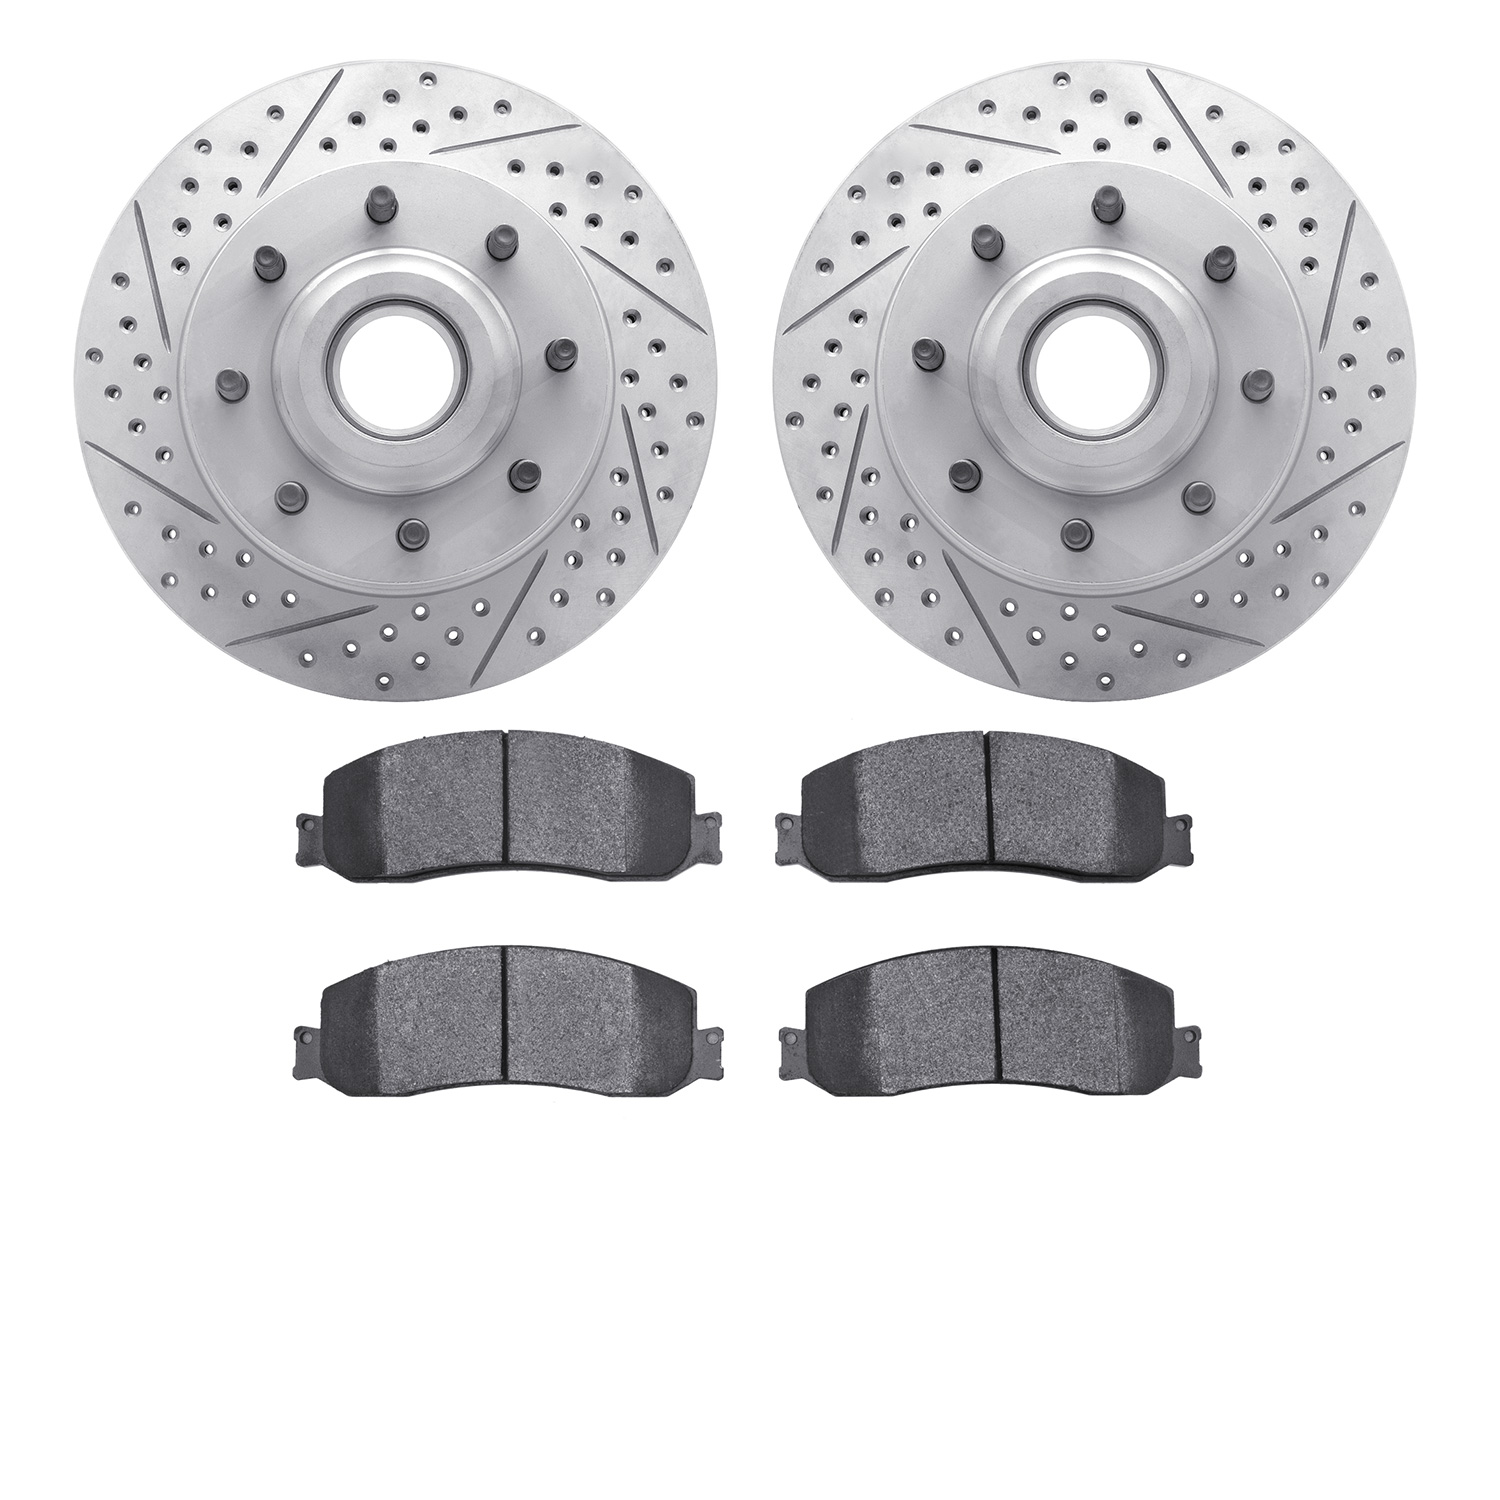 2402-54064 Geoperformance Drilled/Slotted Brake Rotors with Ultimate-Duty Brake Pads Kit, 2012-2012 Ford/Lincoln/Mercury/Mazda,